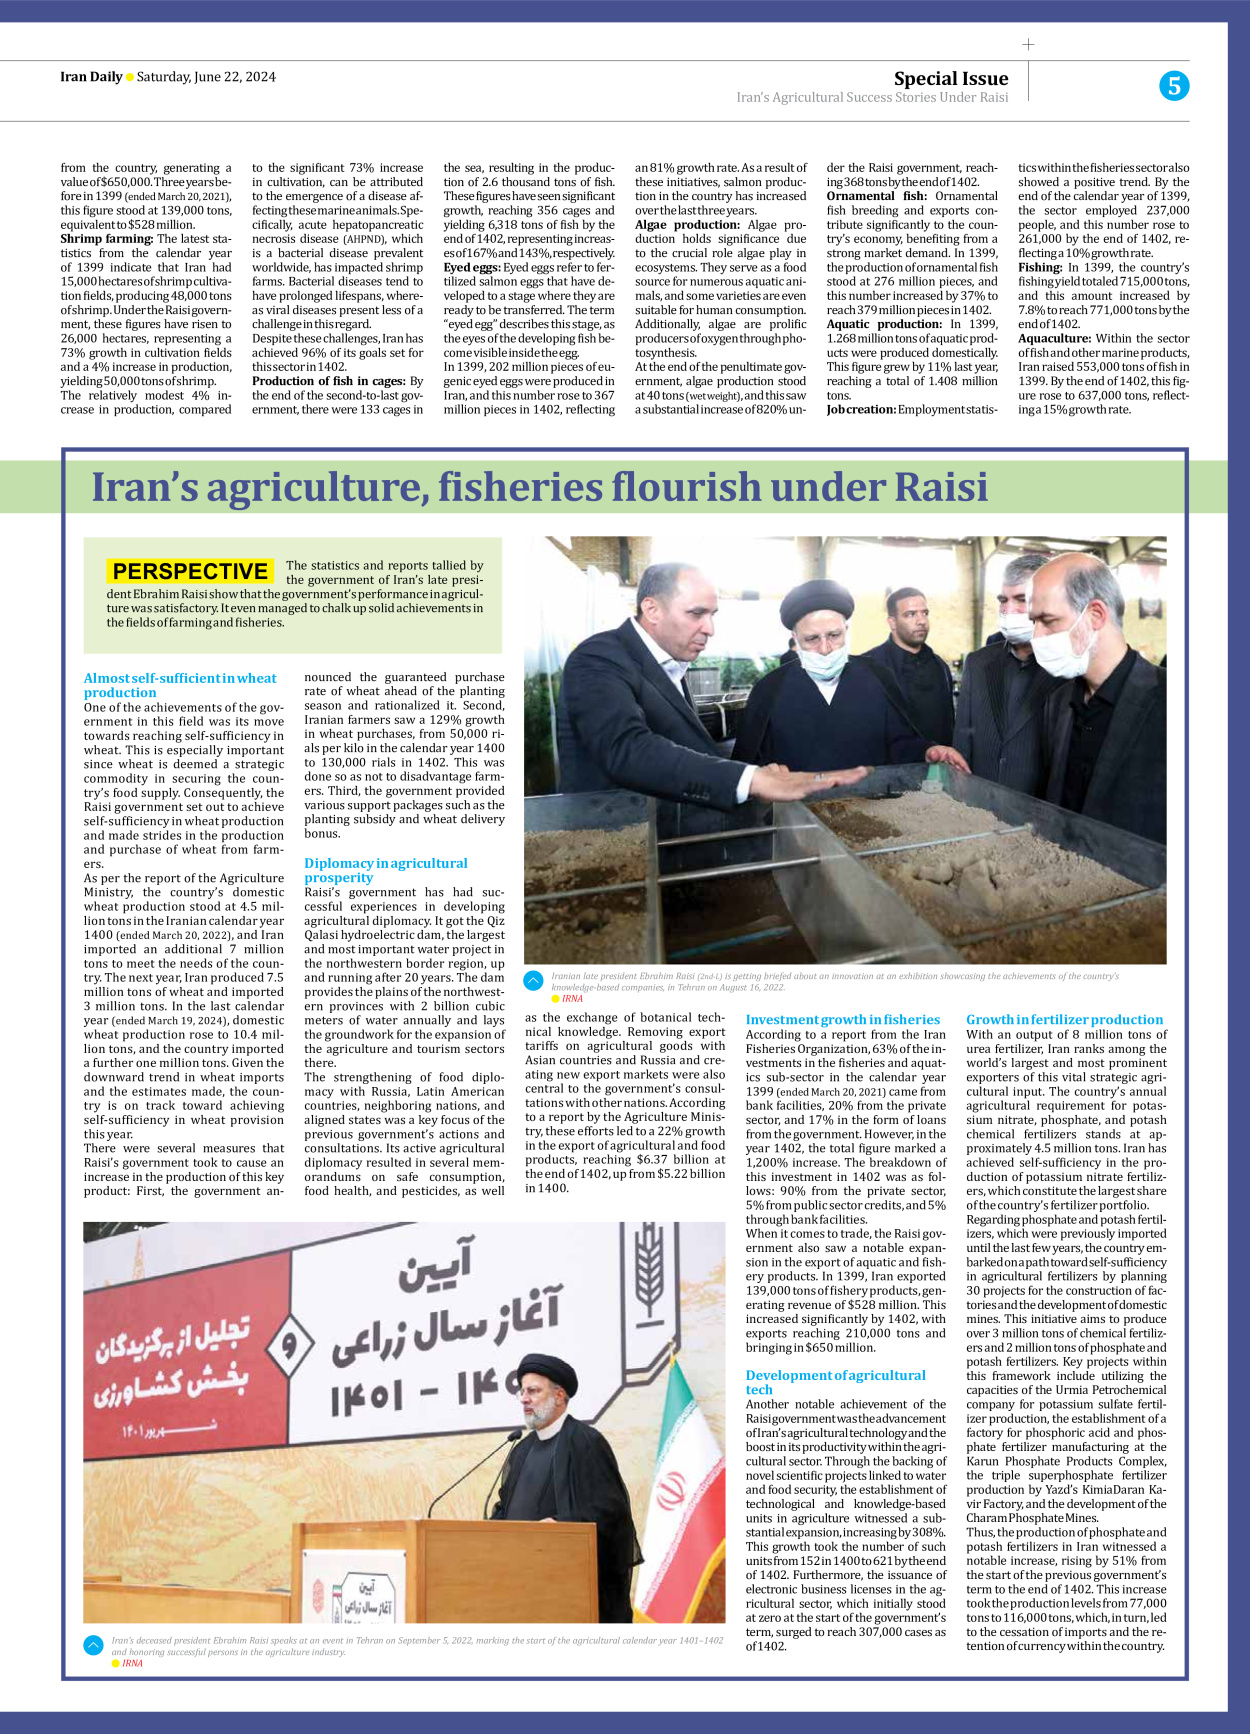 Iran Daily - Number Seven Thousand Five Hundred and Eighty Six - 22 June 2024 - Page 5